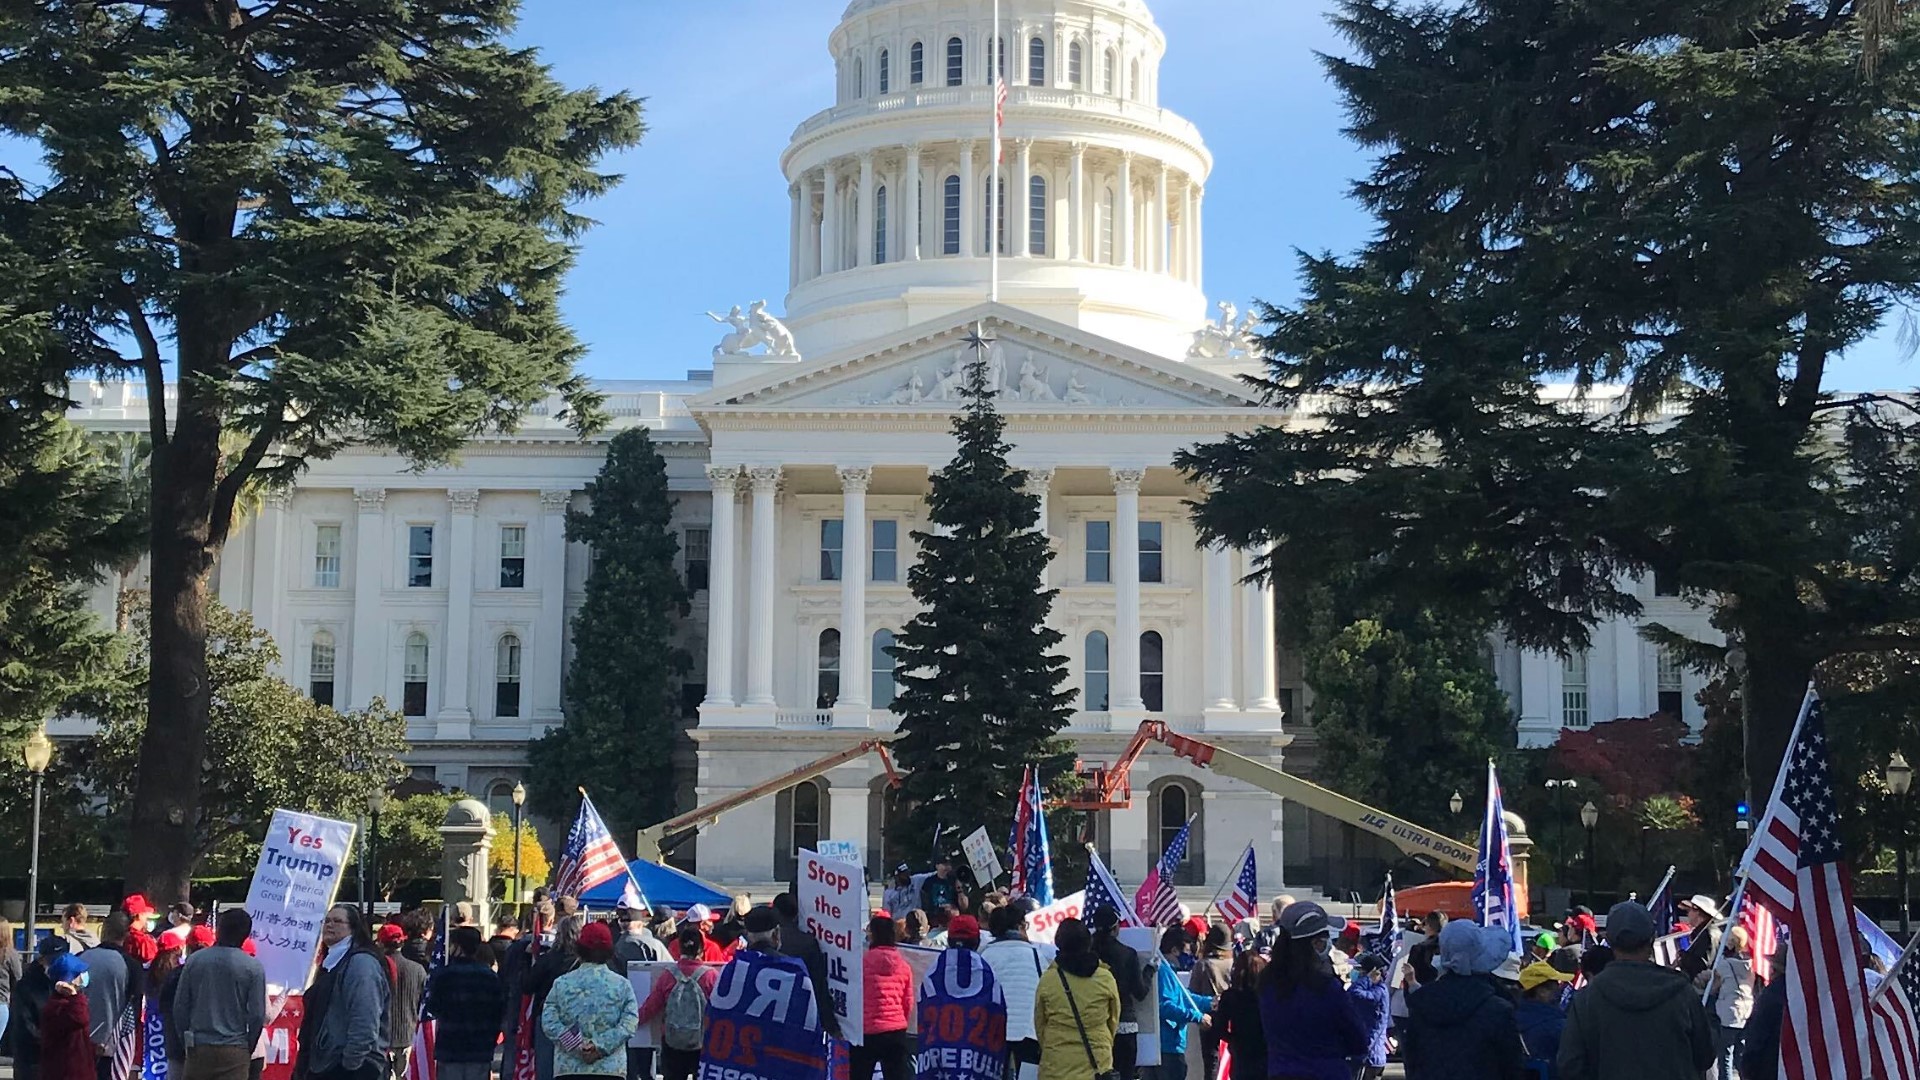 A crowd gathered at the Capitol air frustrations regarding the presidential election results and California's new pandemic restrictions.